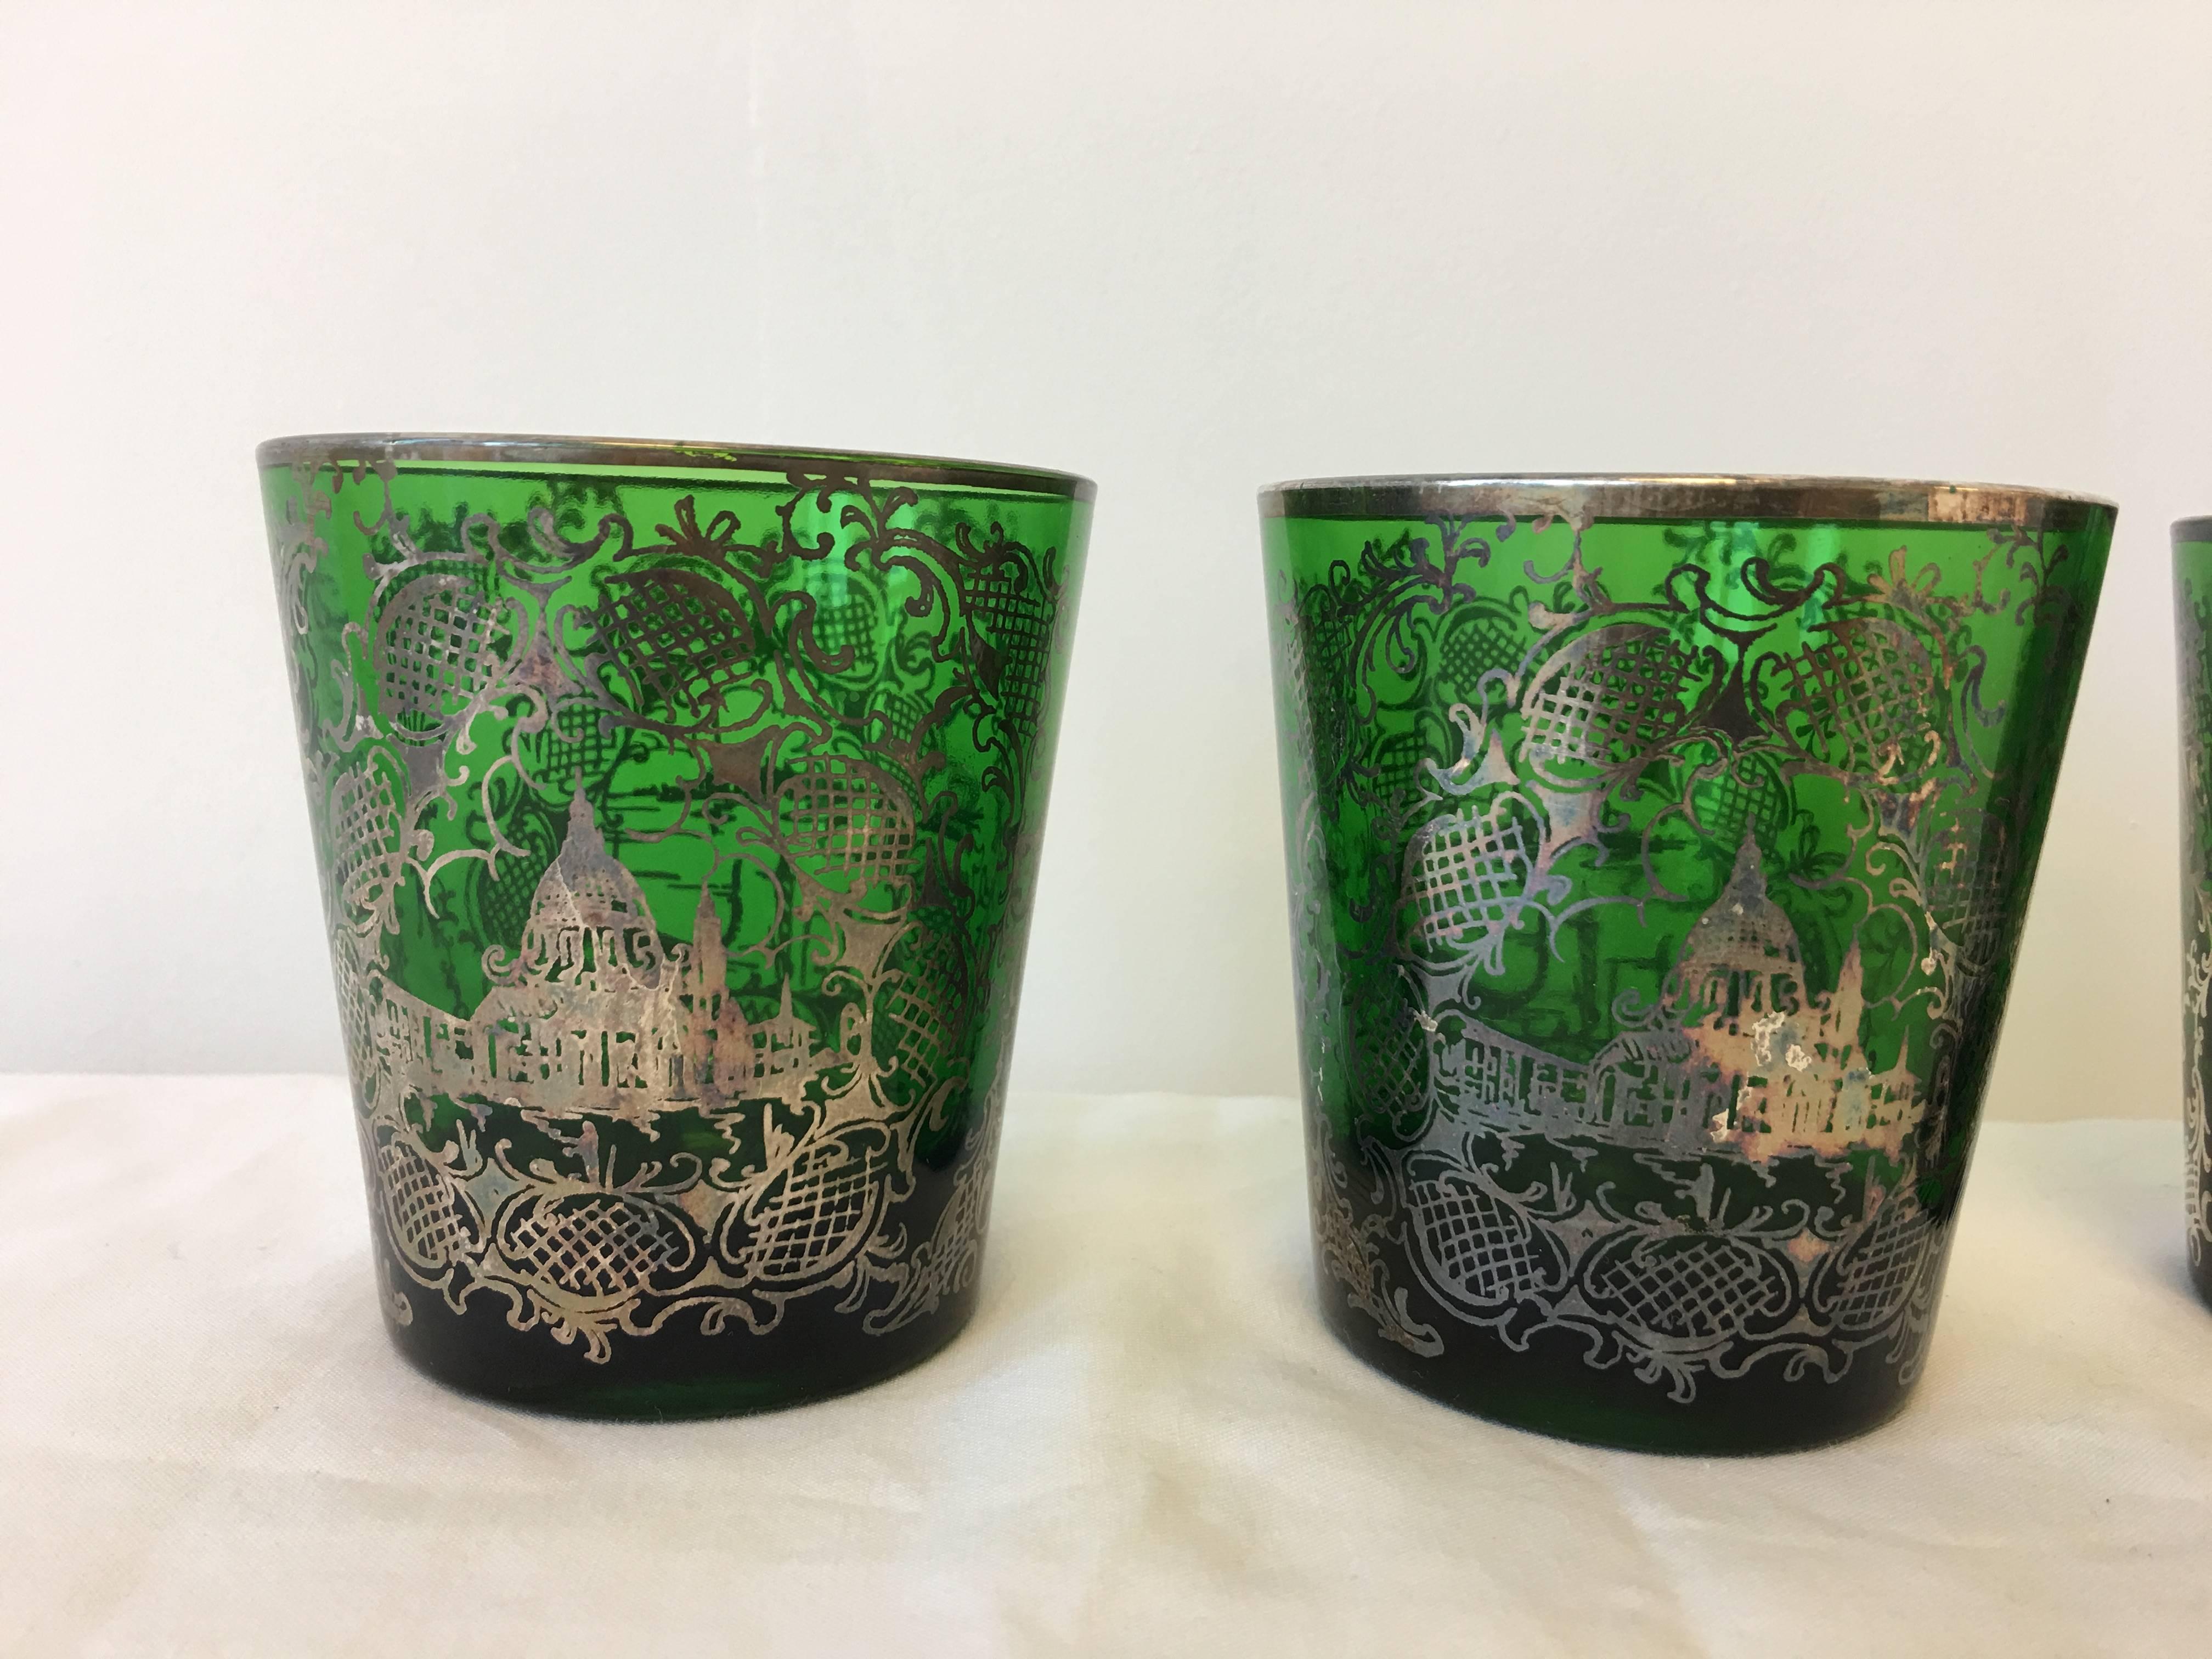 Offered is a fabulous, set of four, 1940's ornate green and silver inlay glasses. These would make perfect candleholders.